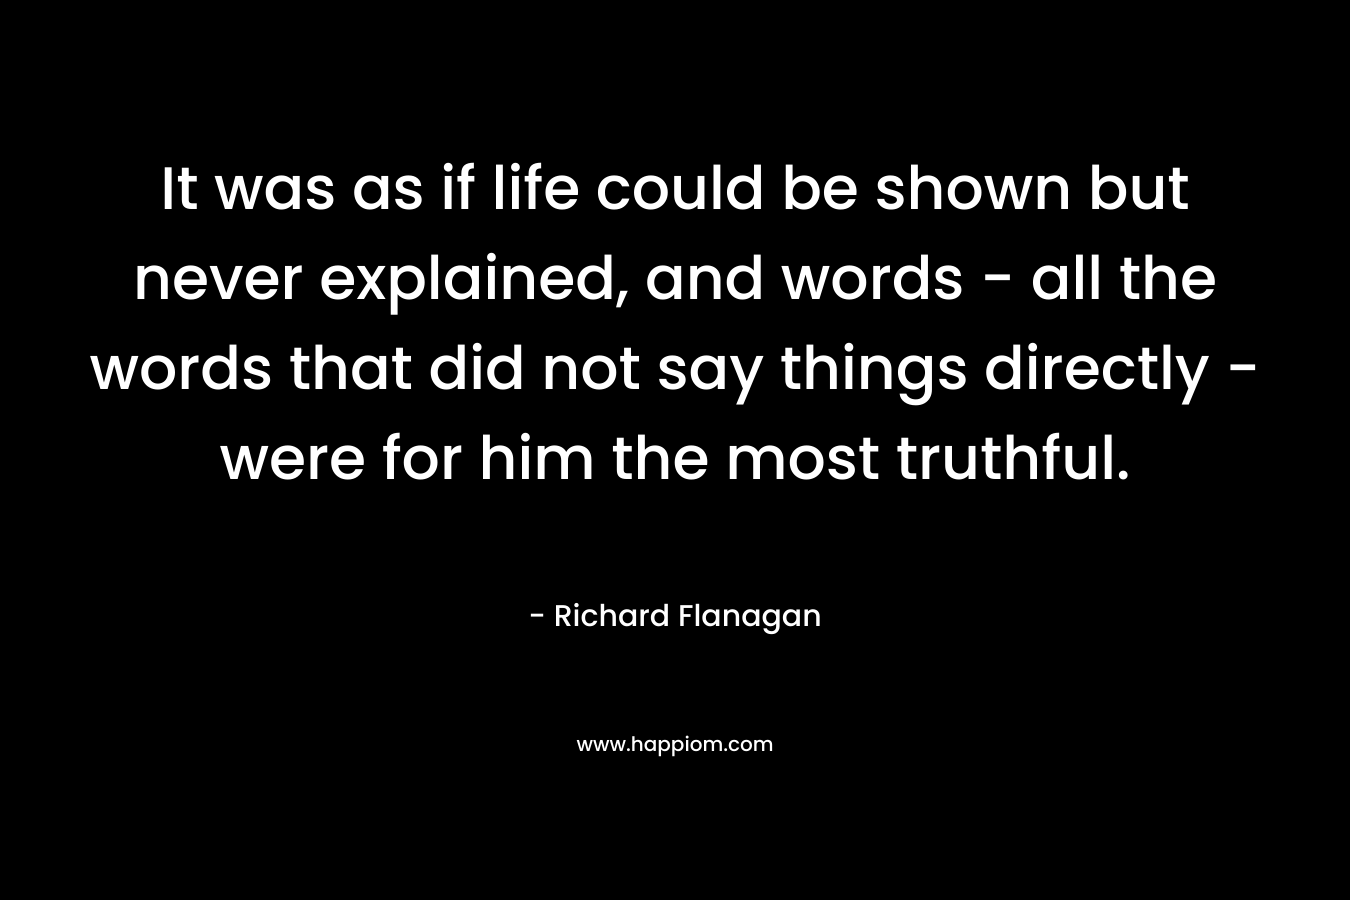 It was as if life could be shown but never explained, and words - all the words that did not say things directly - were for him the most truthful.